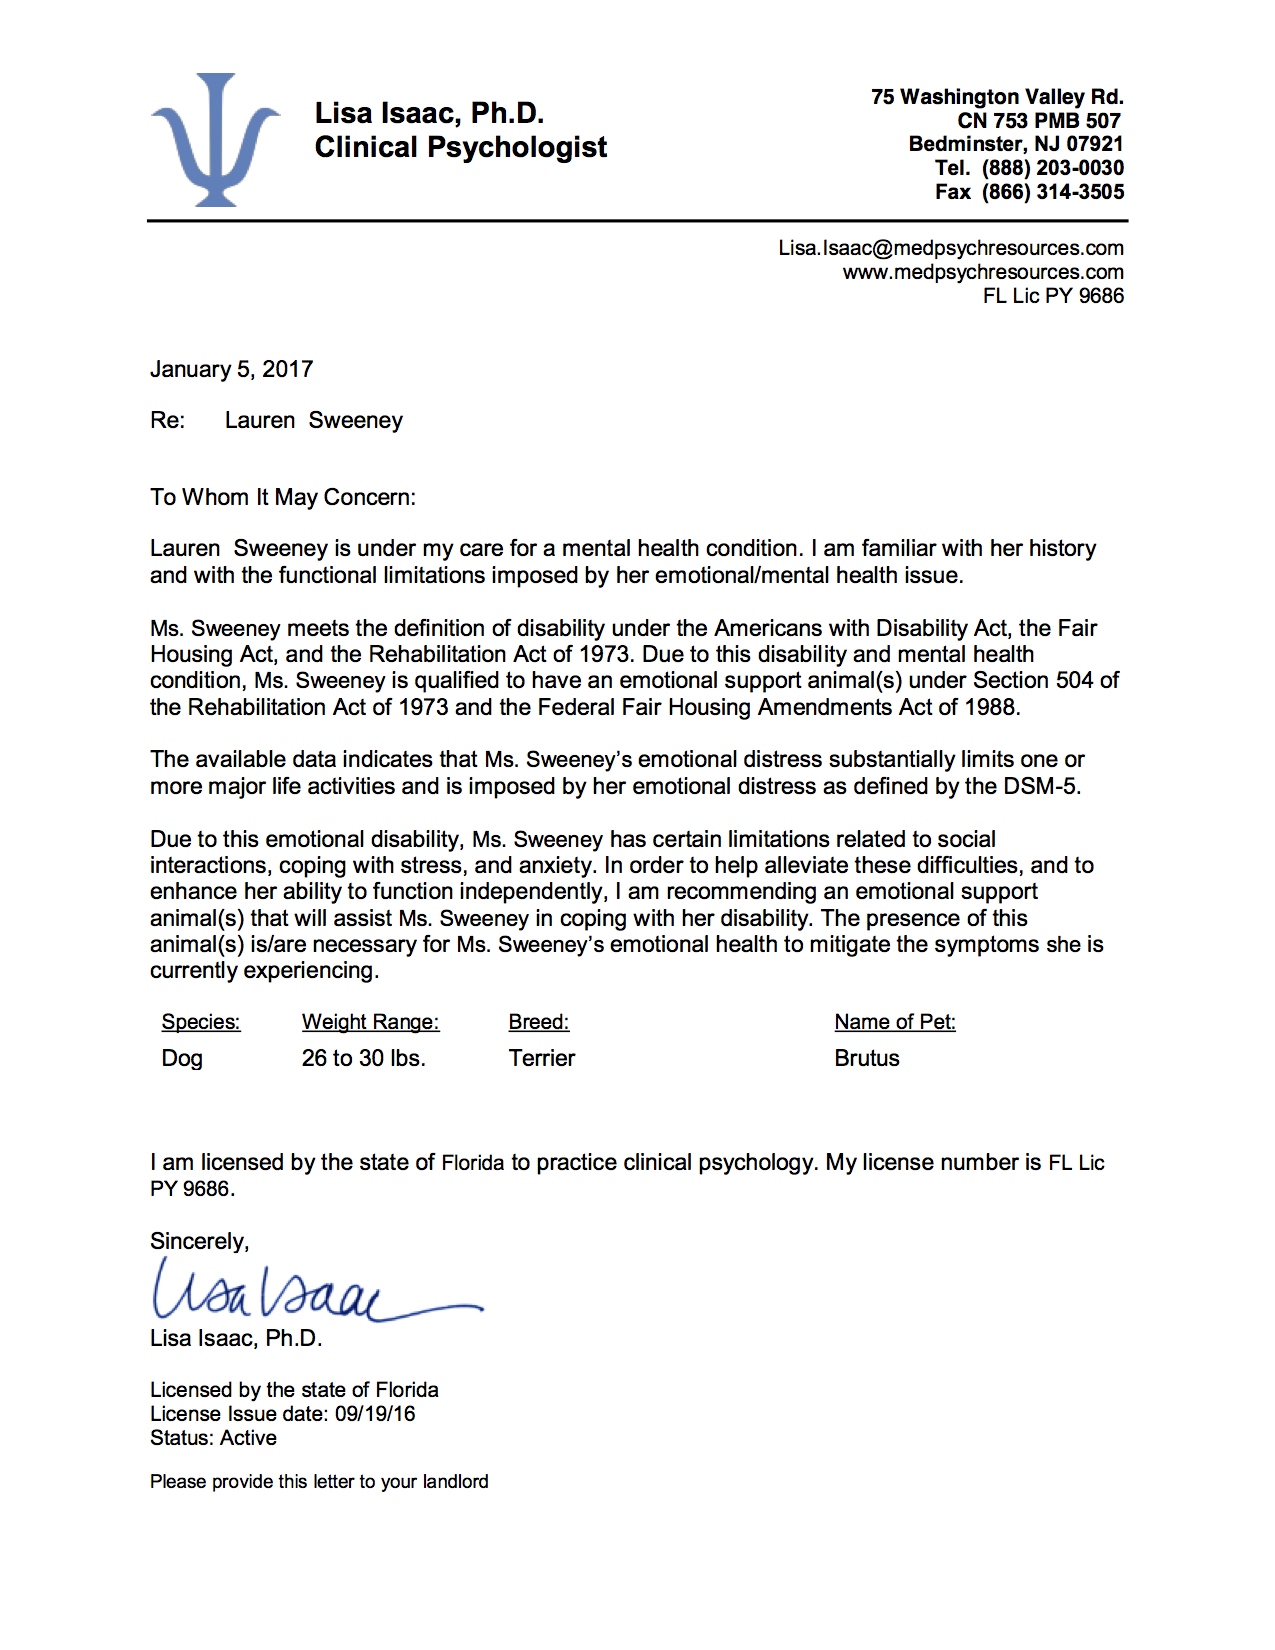 Sample Letter For Therapy Support Animal / Esa Letter Template